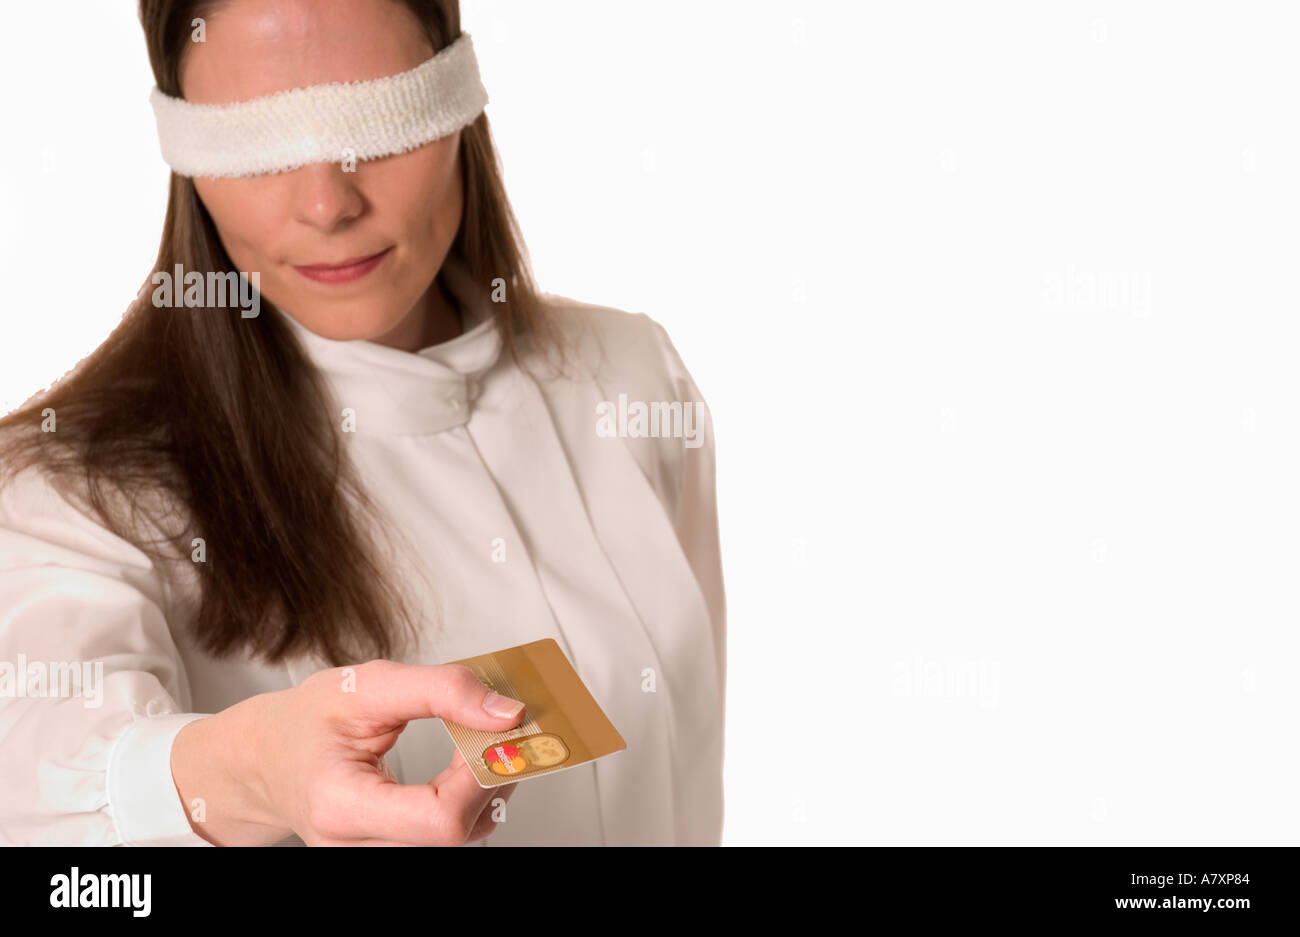 Young woman blindfolded Stock Photo by ©semisatch 66901649